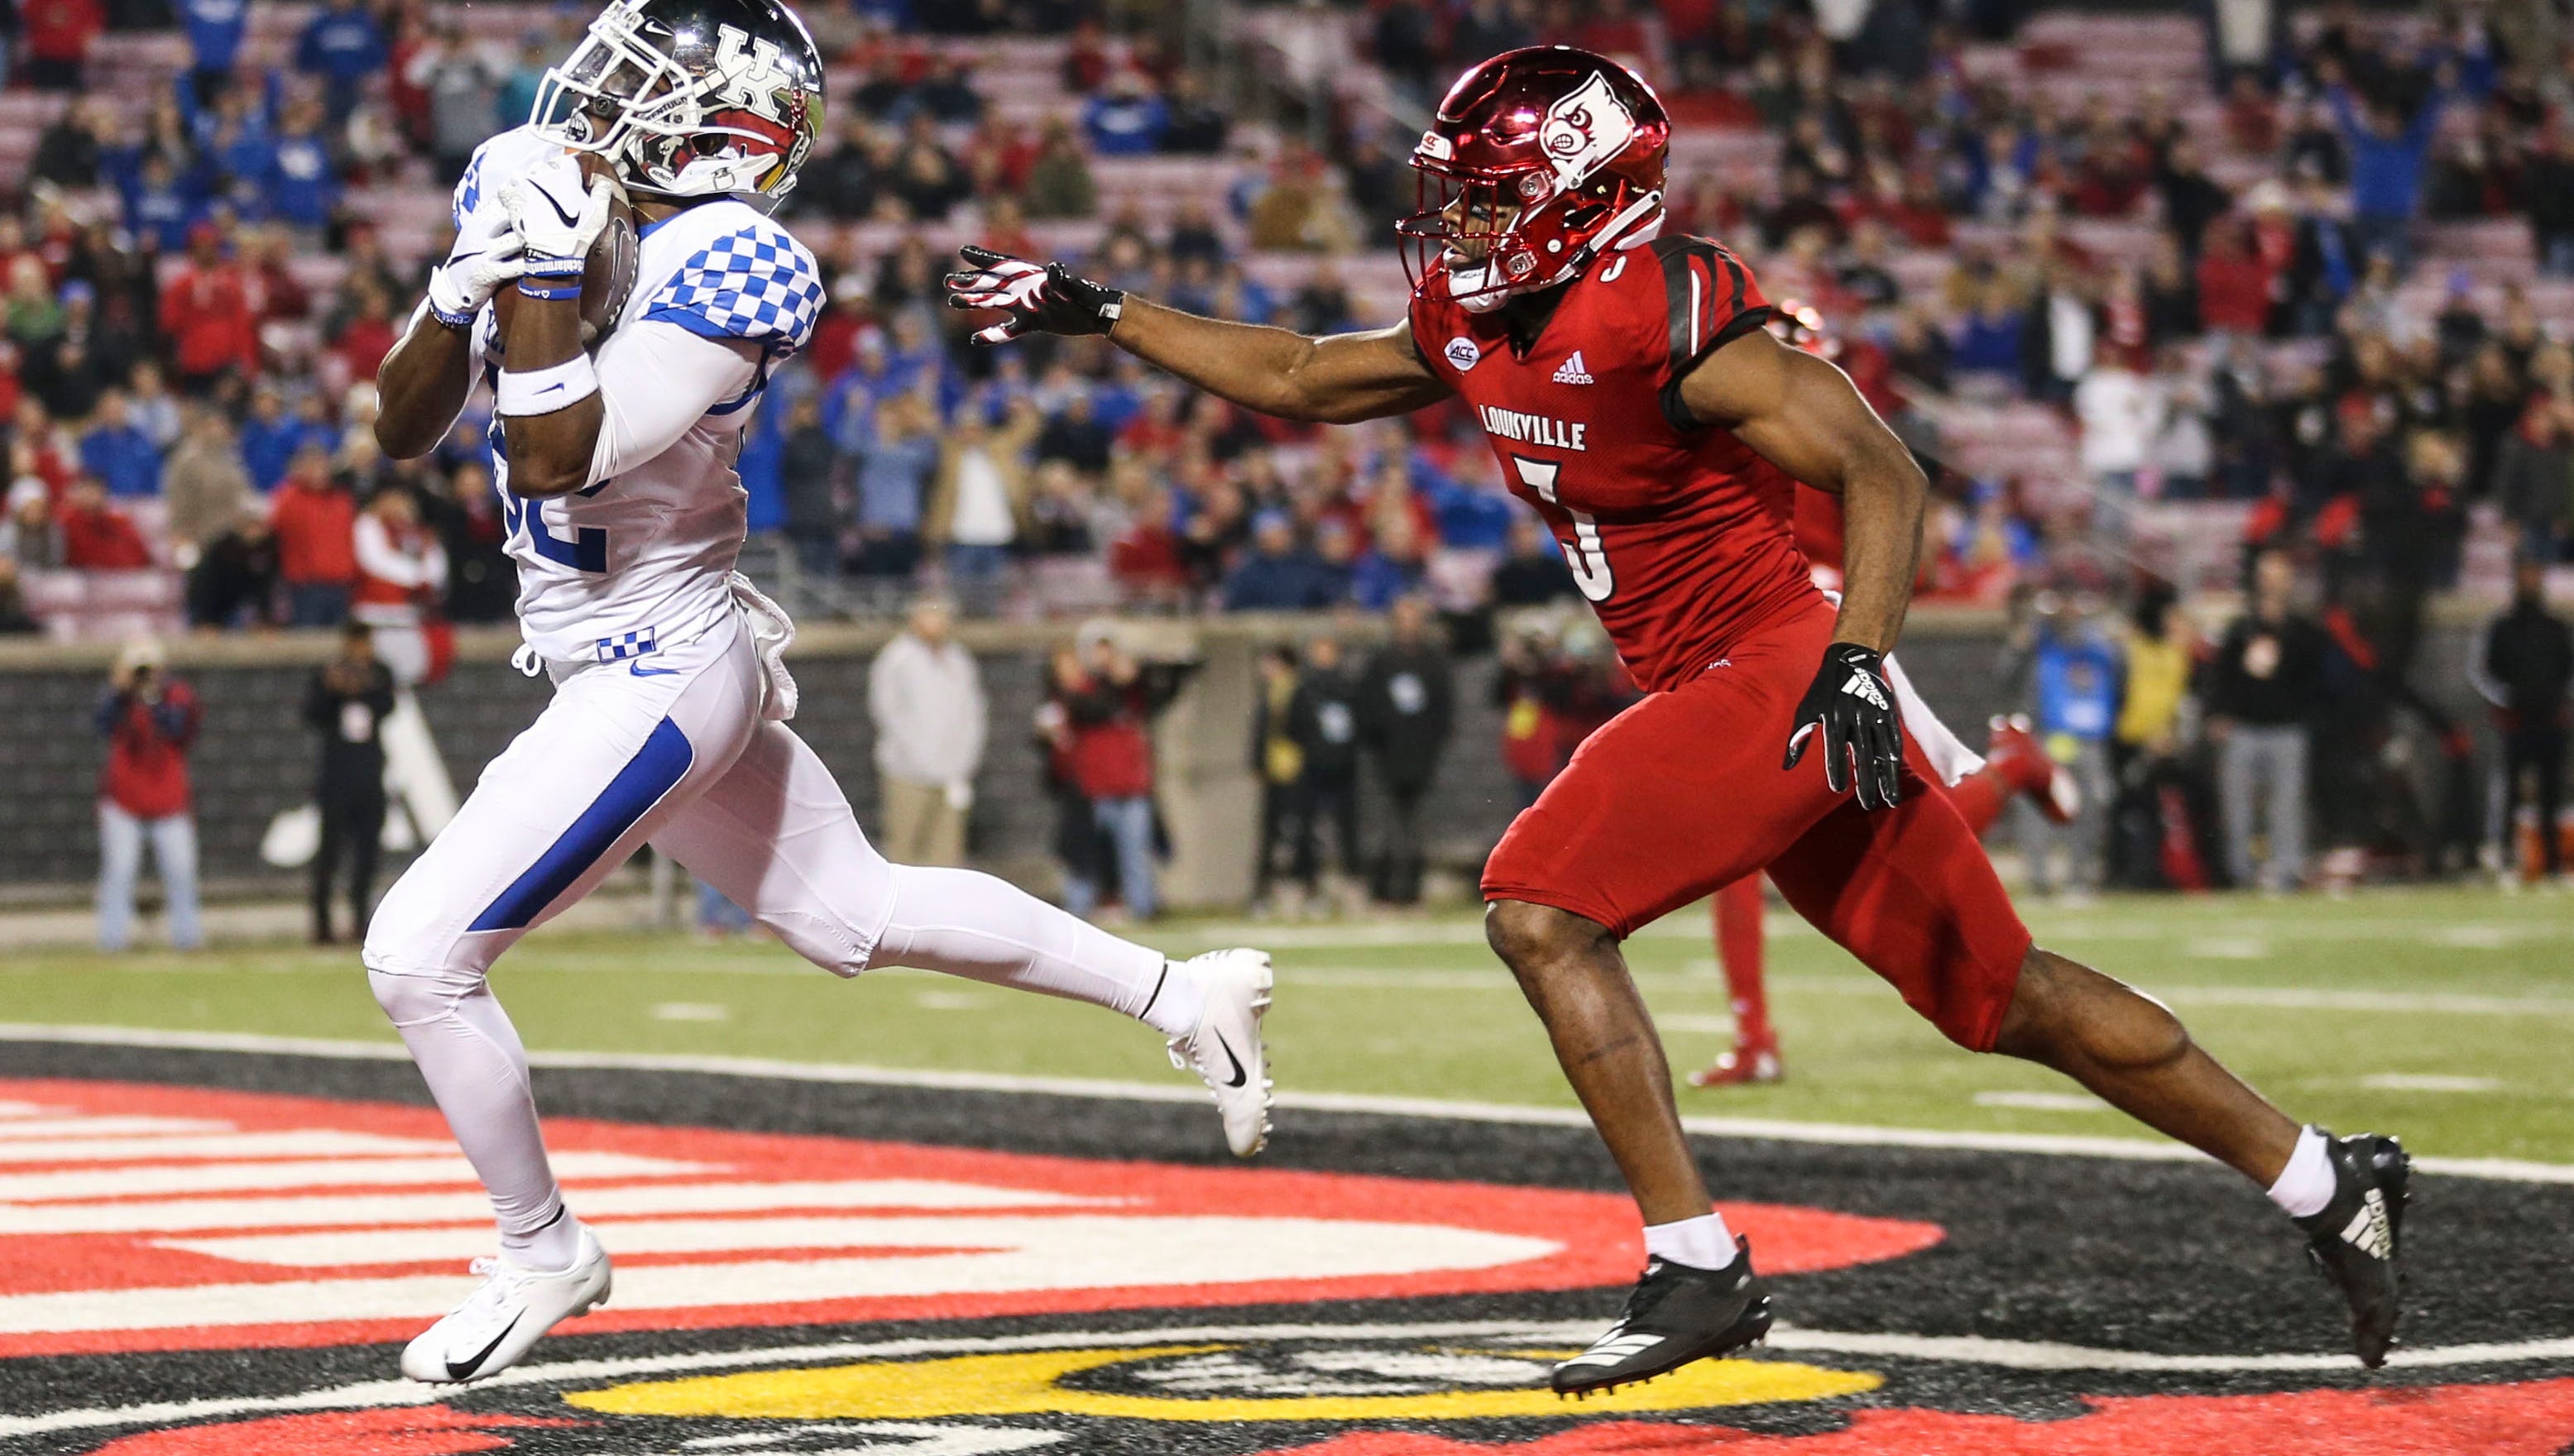 How to watch Kentucky football vs. Louisville TV channel, streaming